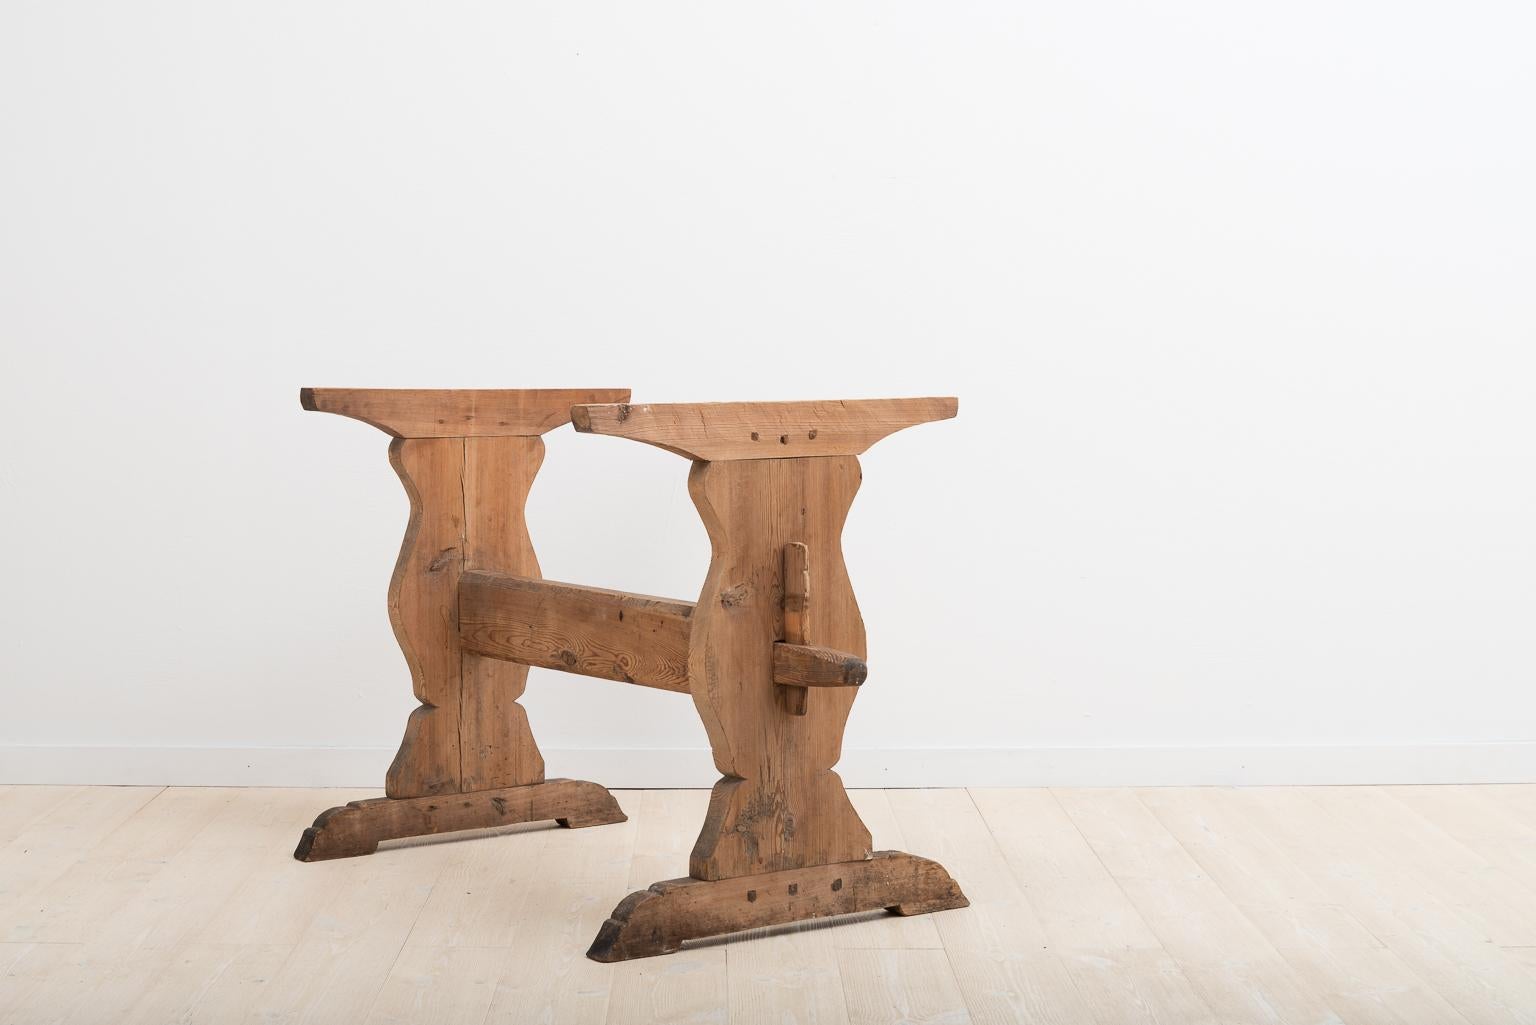 Trestle table with profiled legs in pine. The table has smaller marks and traces after over 250 years of use see picture. All pieces are original to the table including the wedges. Manufactured in northern Sweden, circa late 1700s.